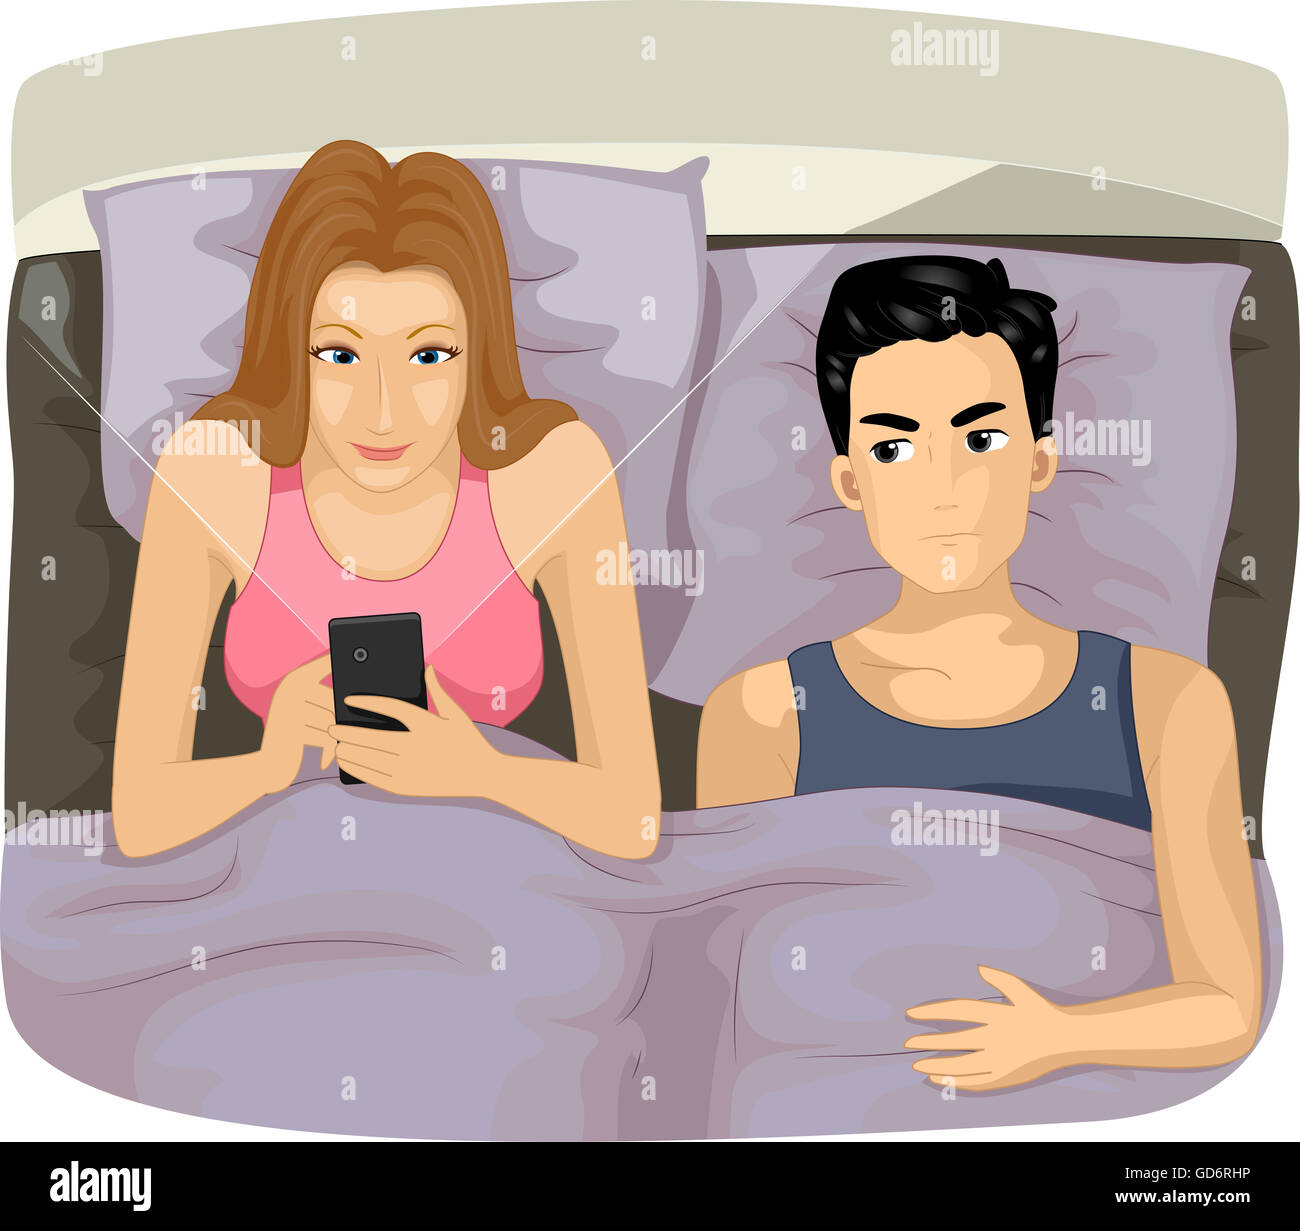 Illustration of an Irritated Husband Watching His Wife Fiddle with Her Phone Stock Photo